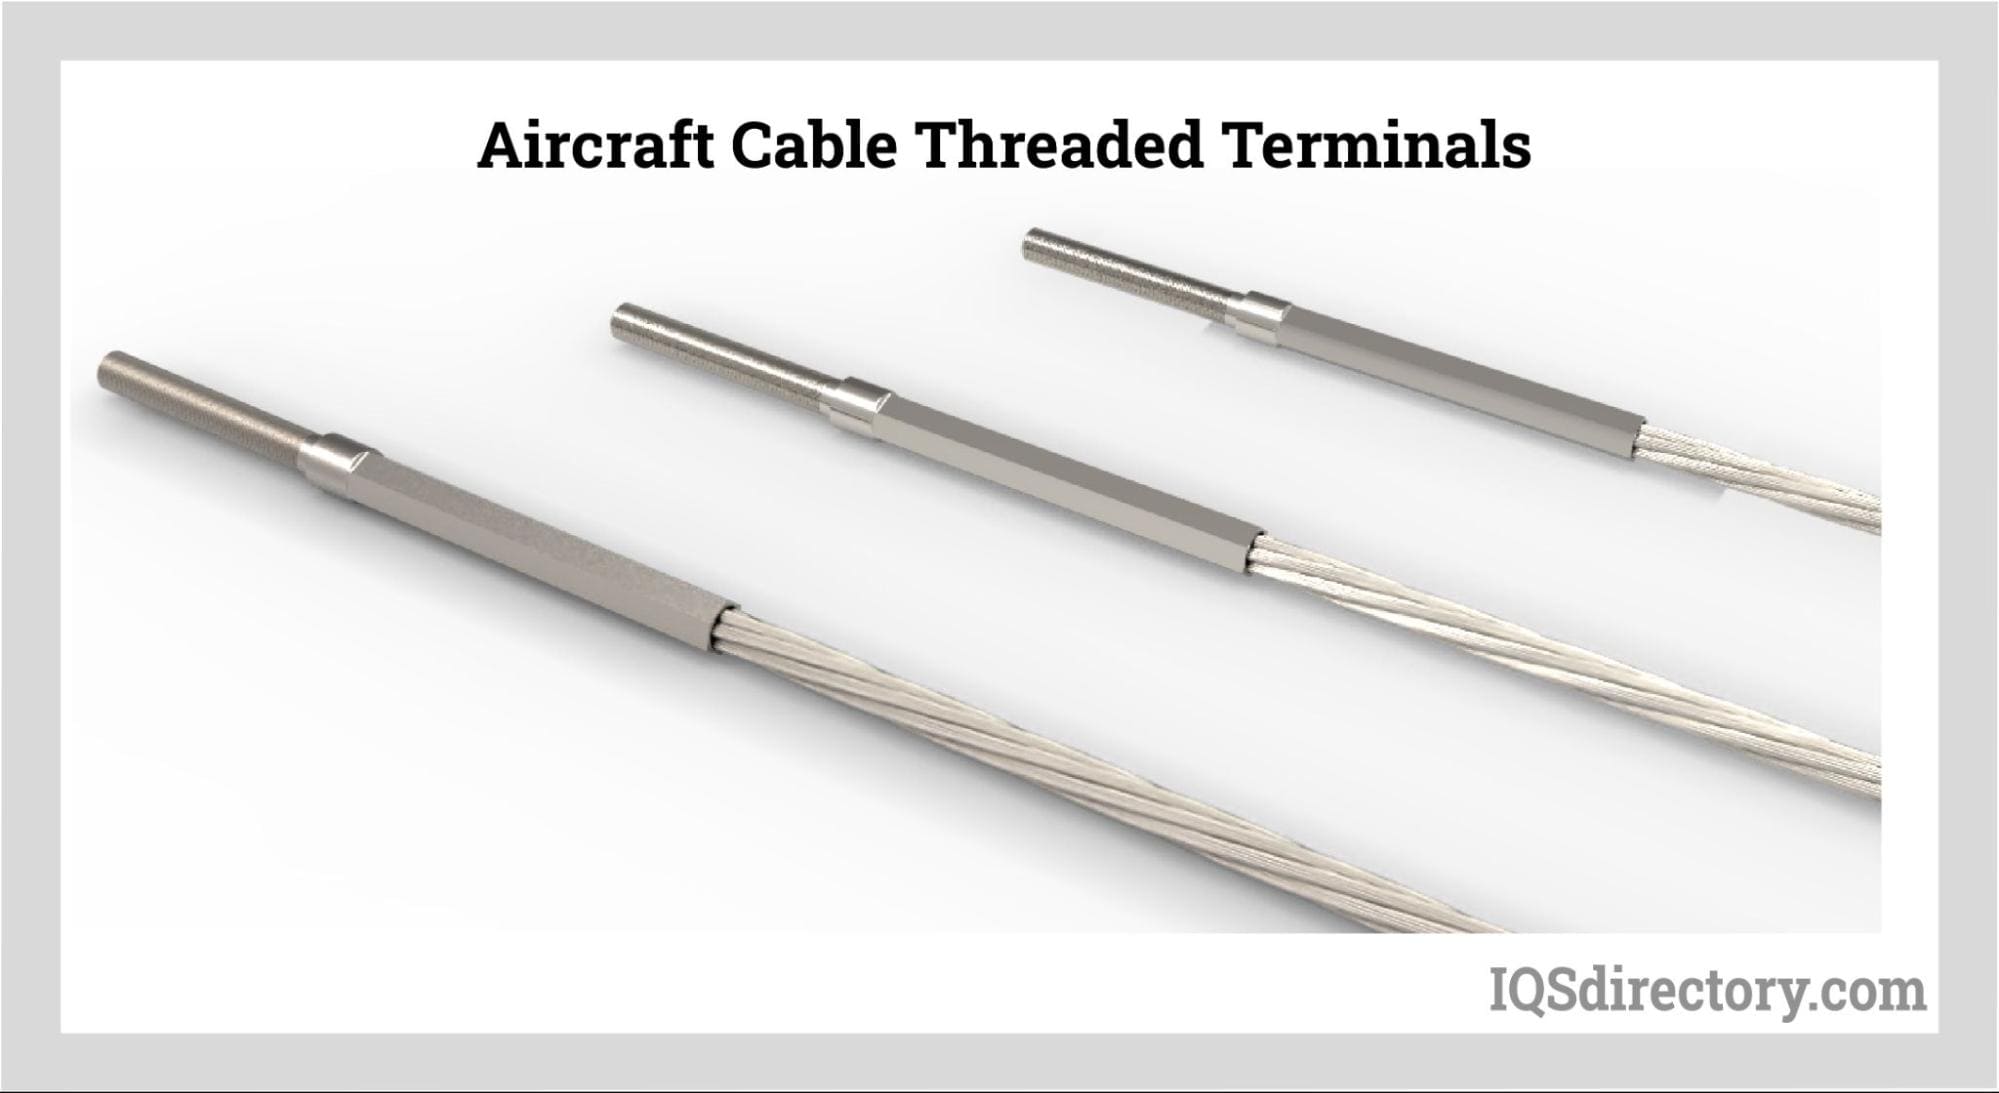 Aircraft Cable Threaded Terminals